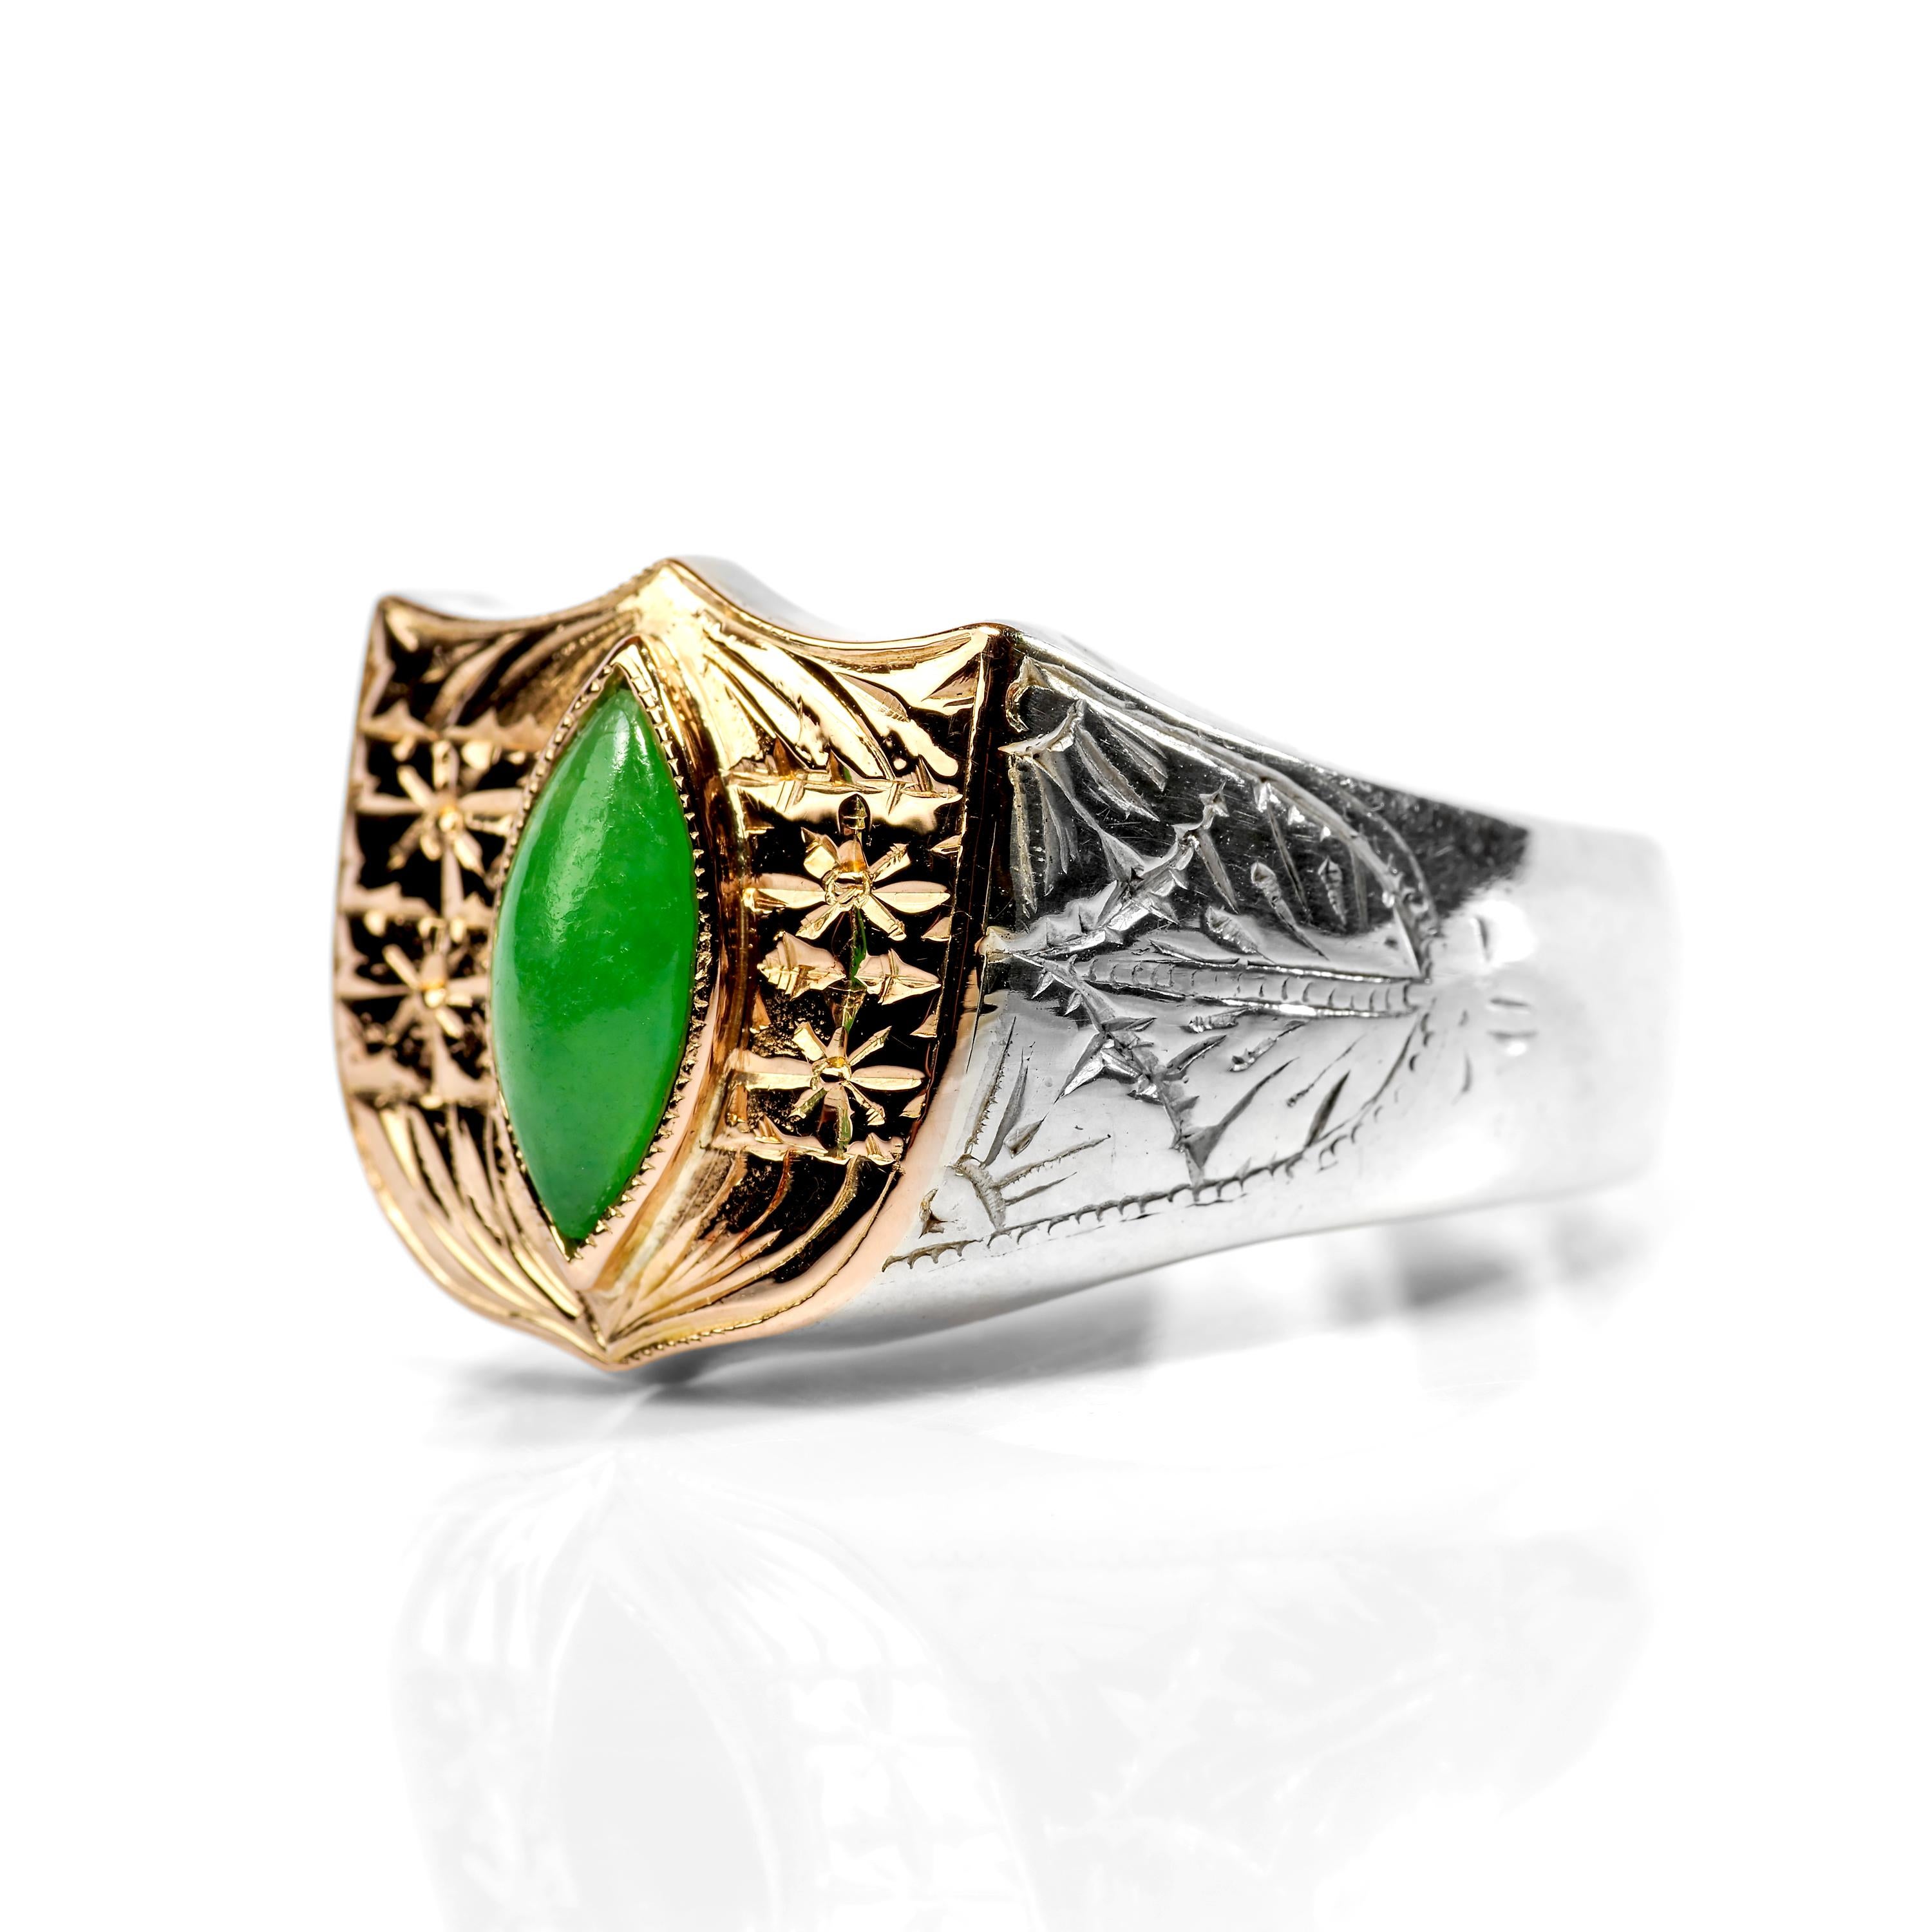 A shield of hand-engraved 18 rose gold holds a marquise cabochon of vivid apple green jadeite in this 18K white gold ring from Japan. Hand-crafted in the Art Deco era, this substantial ring is as beautiful as it is unique. The apple green jade is